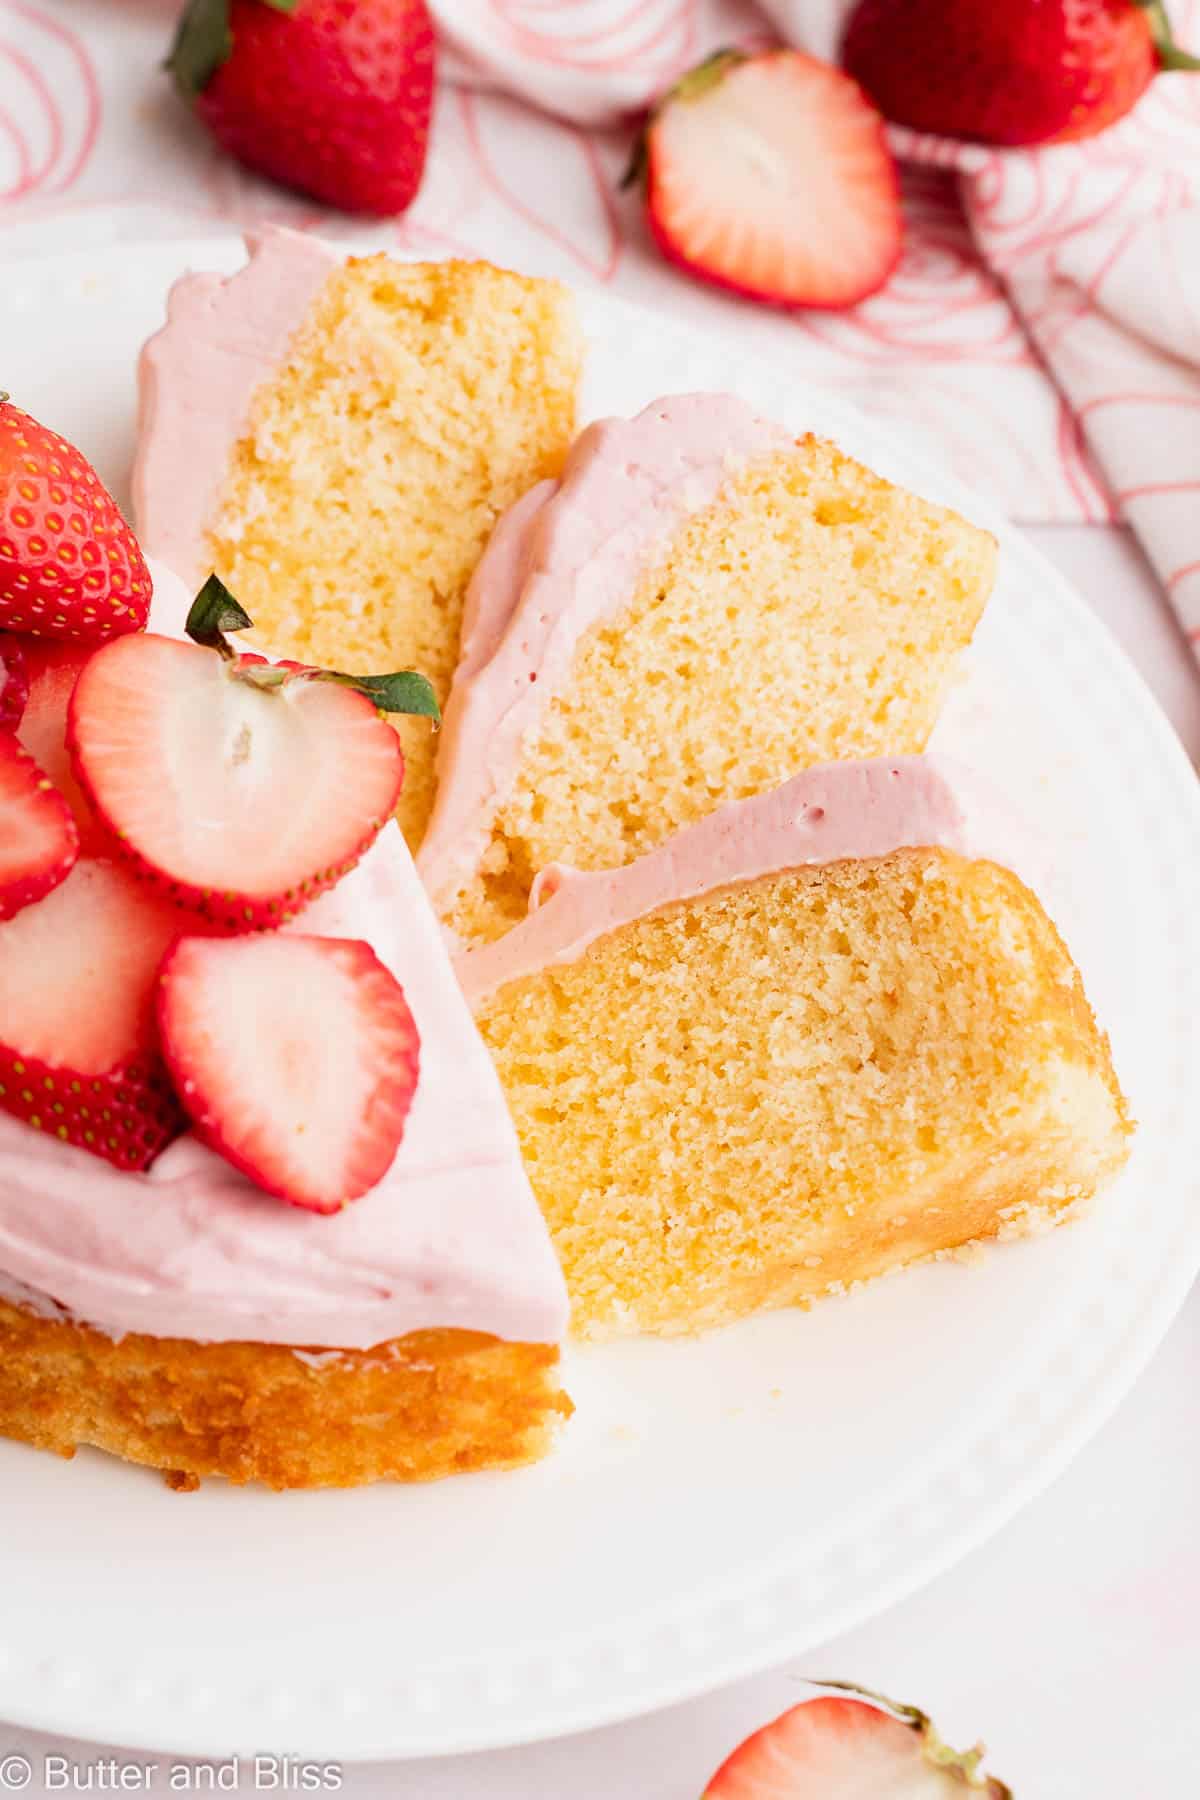 Pretty slices of a small vanilla cake topped with strawberry frosting fanned out on a plate.